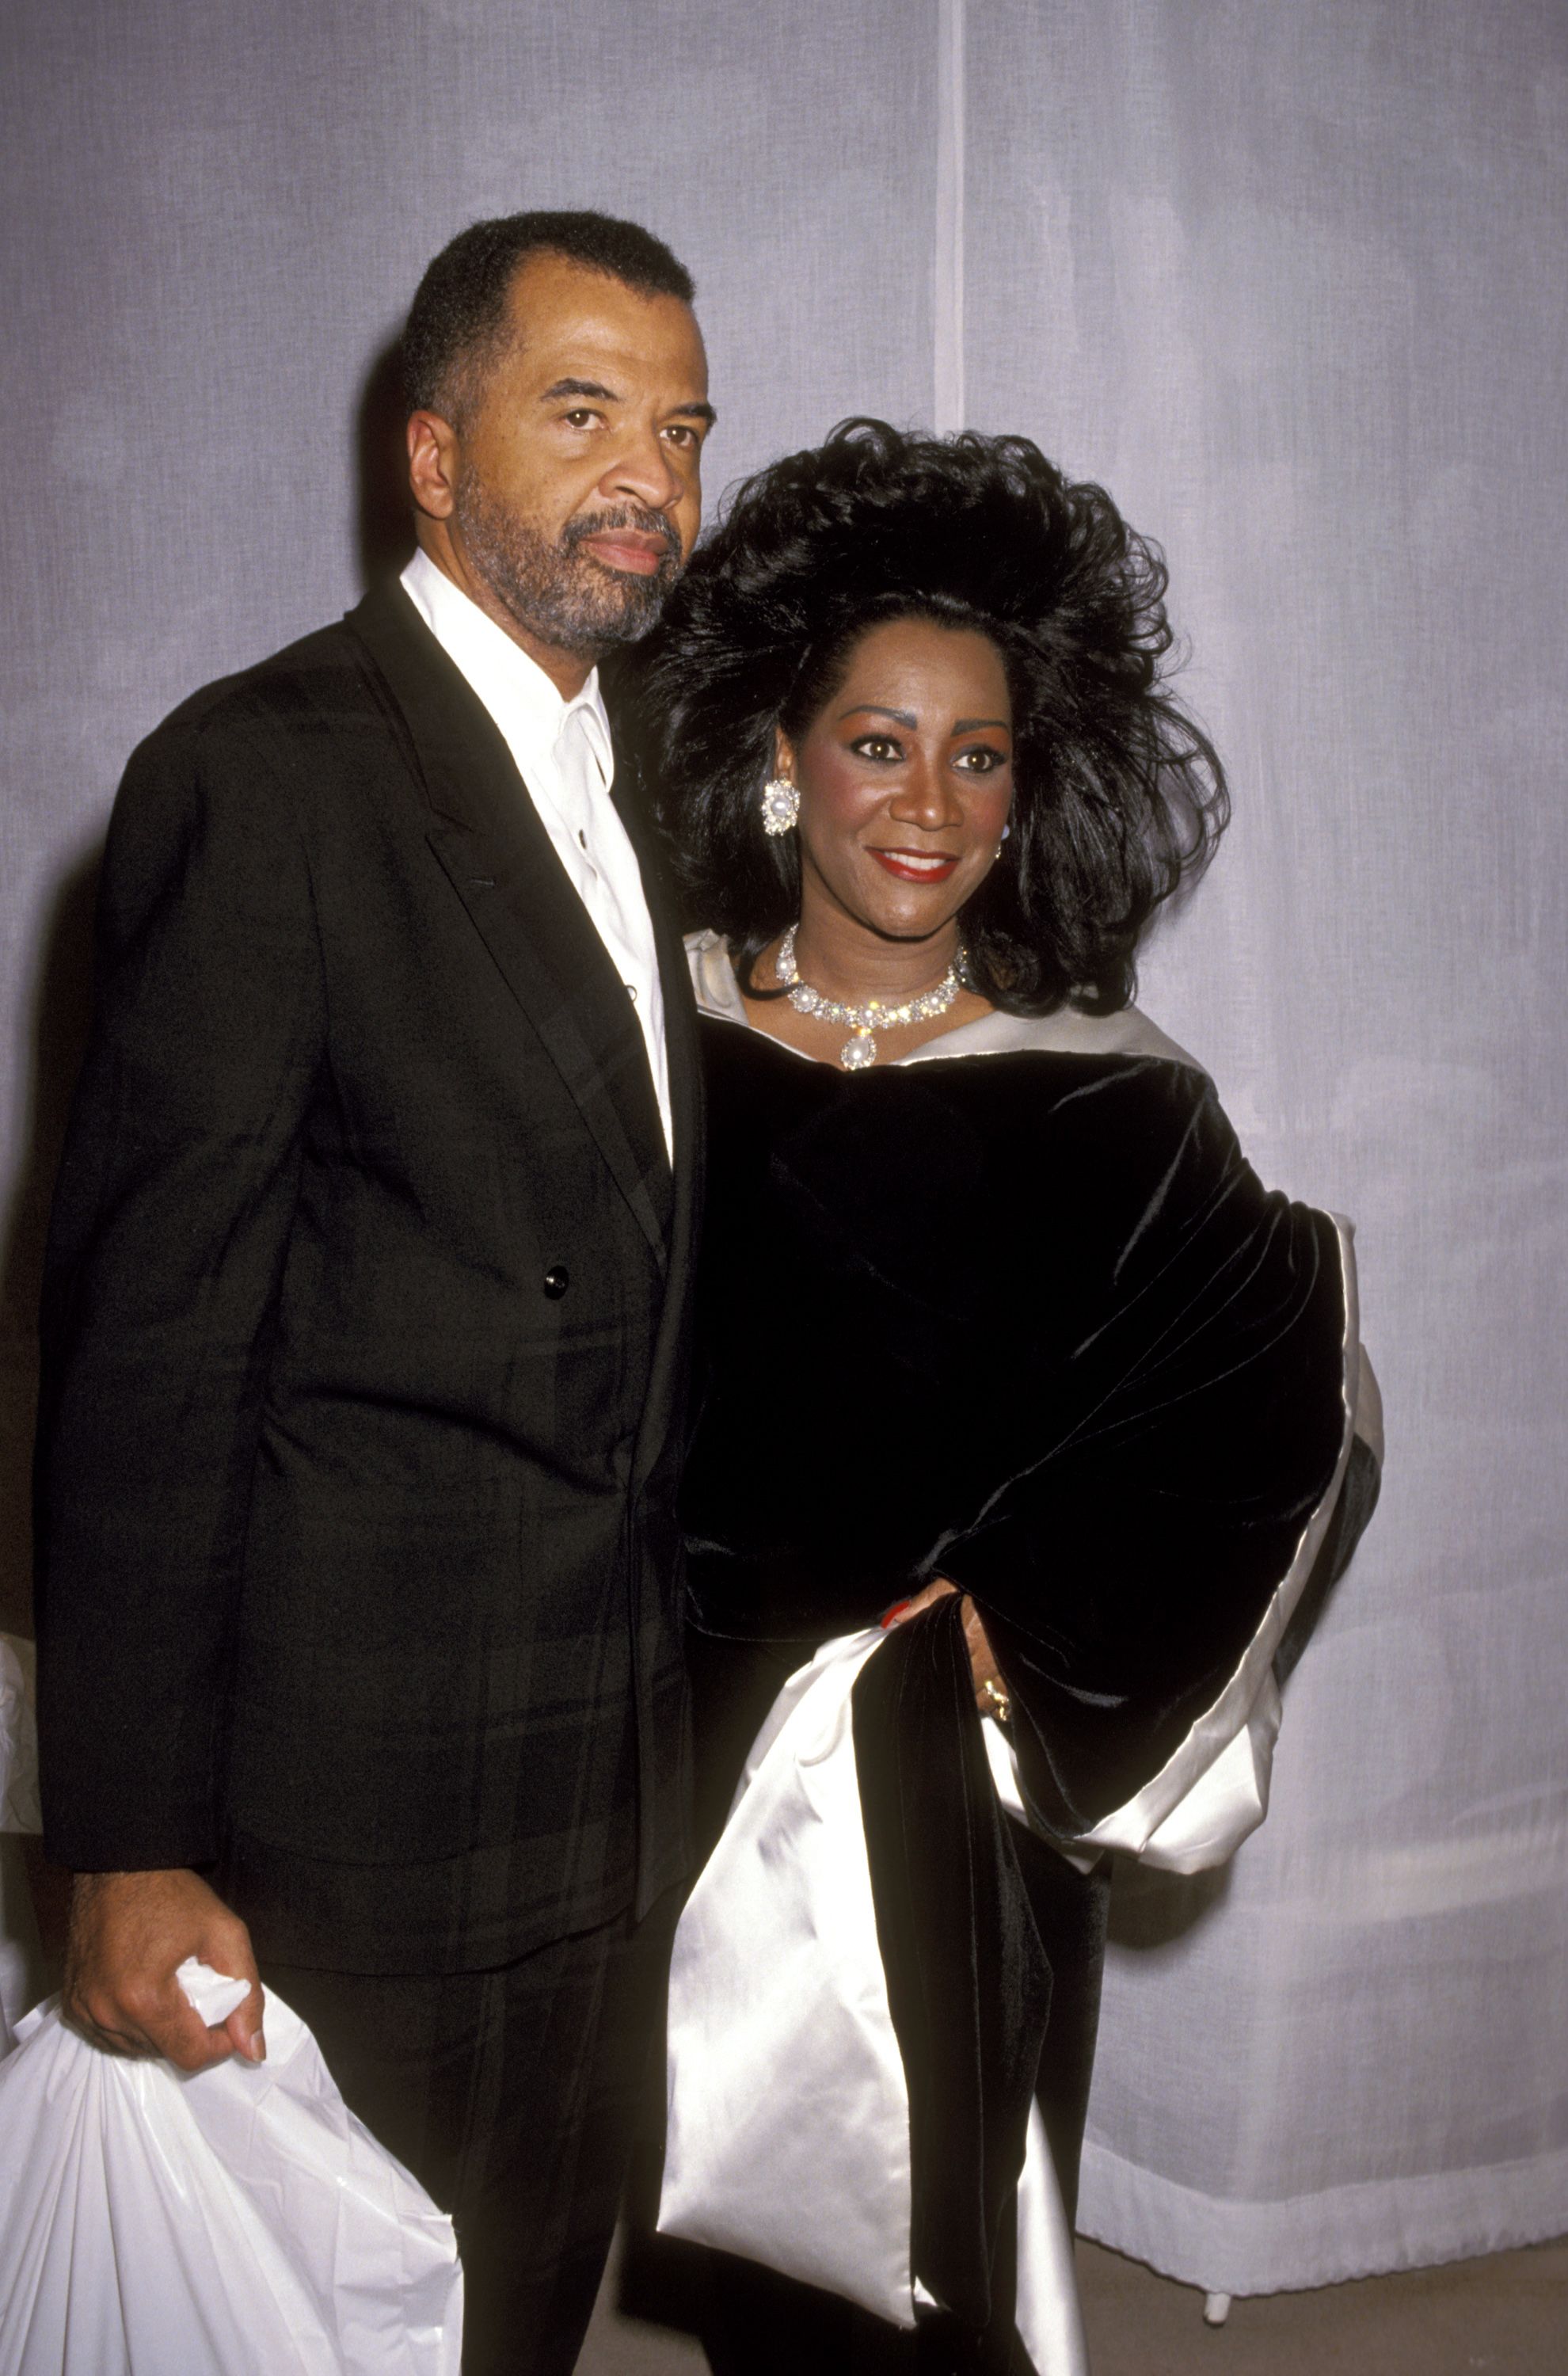 Armstead Edwards: Who Is Patti LaBelle’s Ex-Husband?